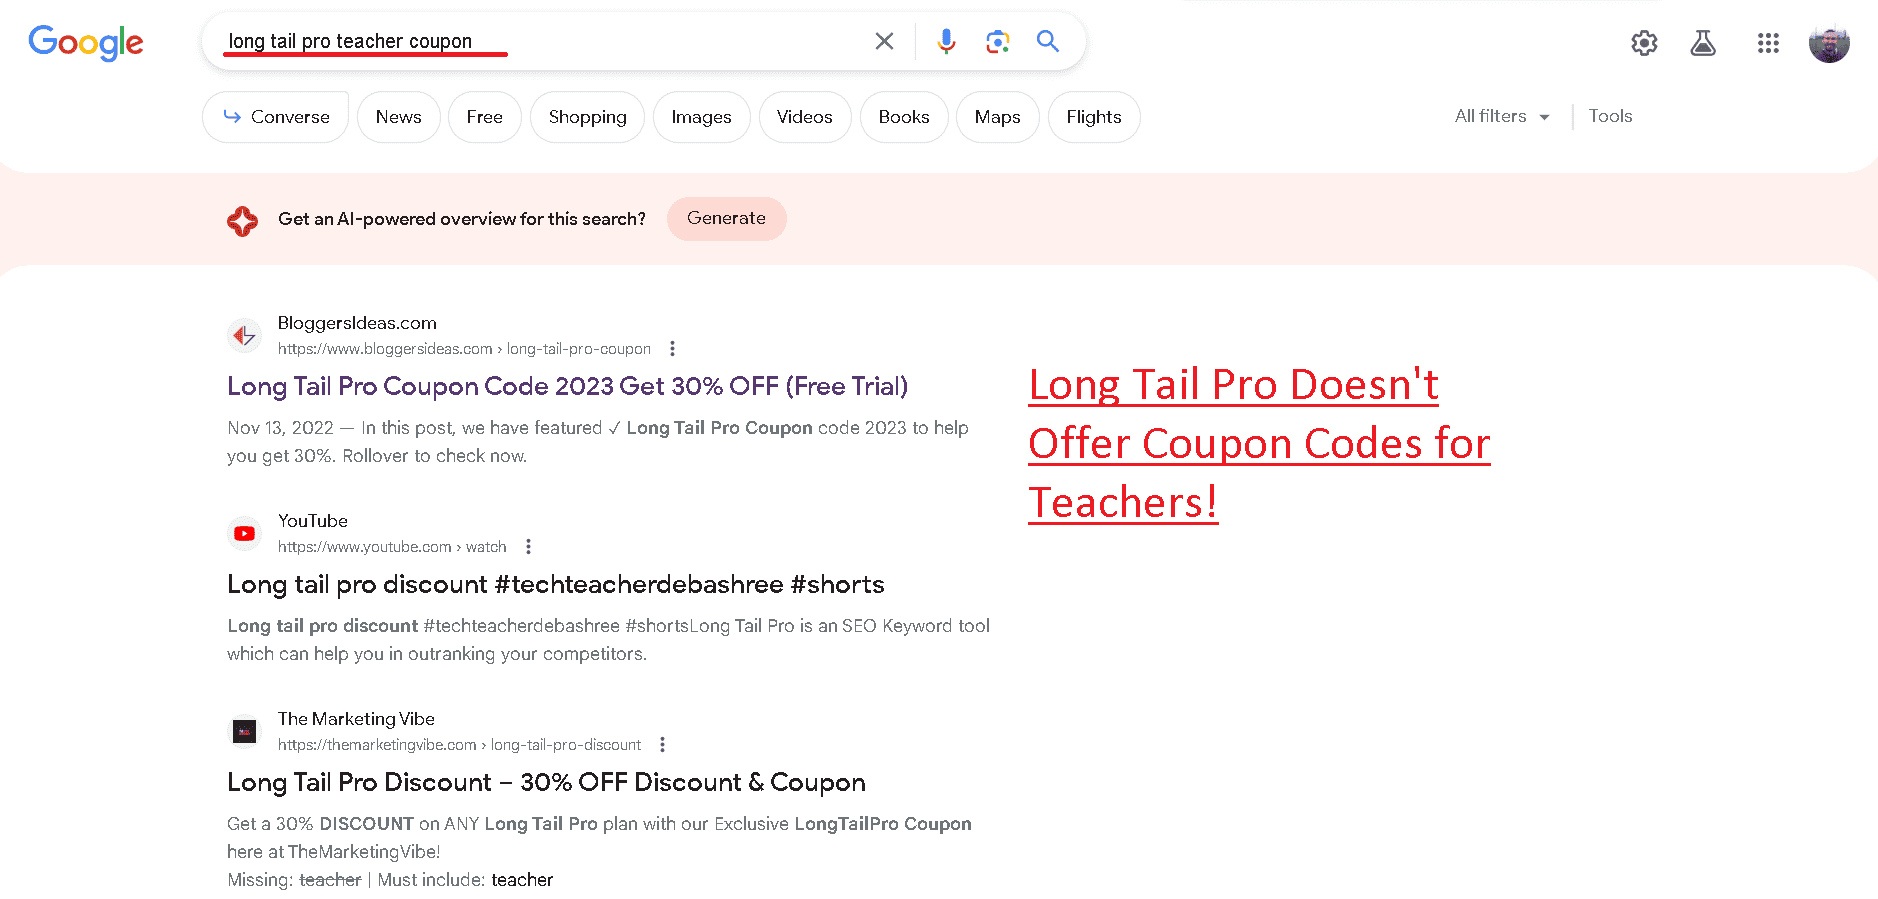 Long Tail Pro doesn't offer coupon codes for teachers